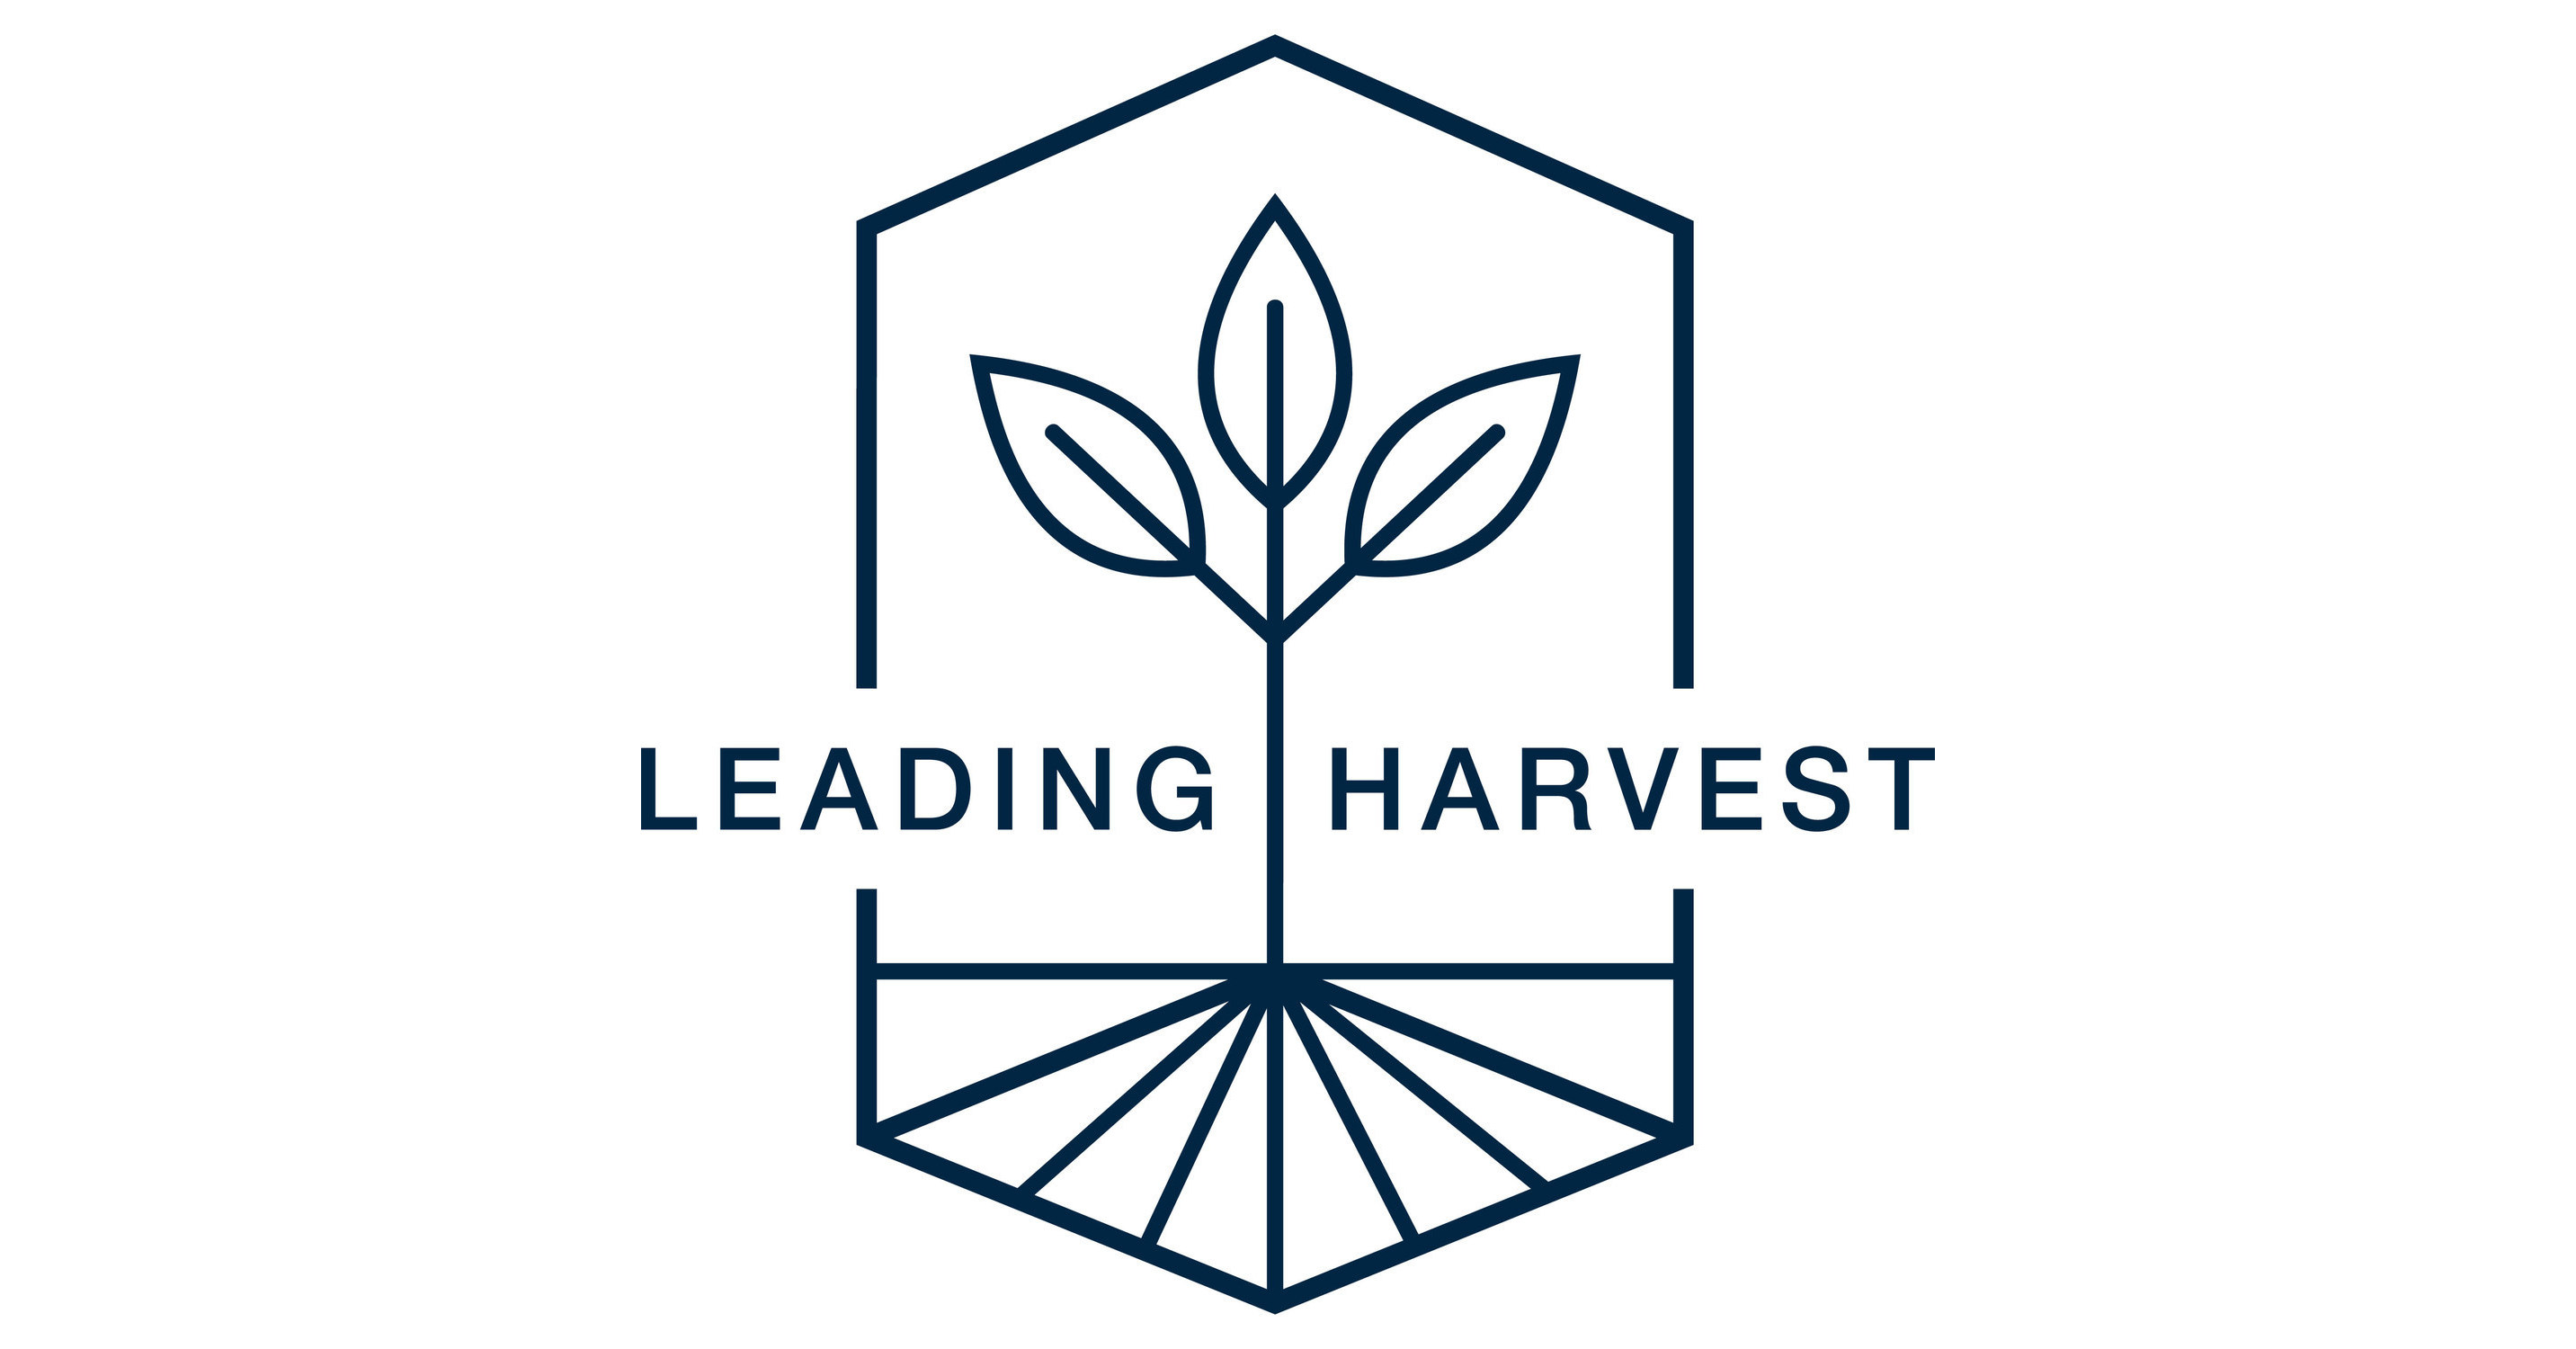 Nestlé, John Deere, Cargill, and Nutrien Ag Options Be part of Main Harvest’s New Founding Supporter Council